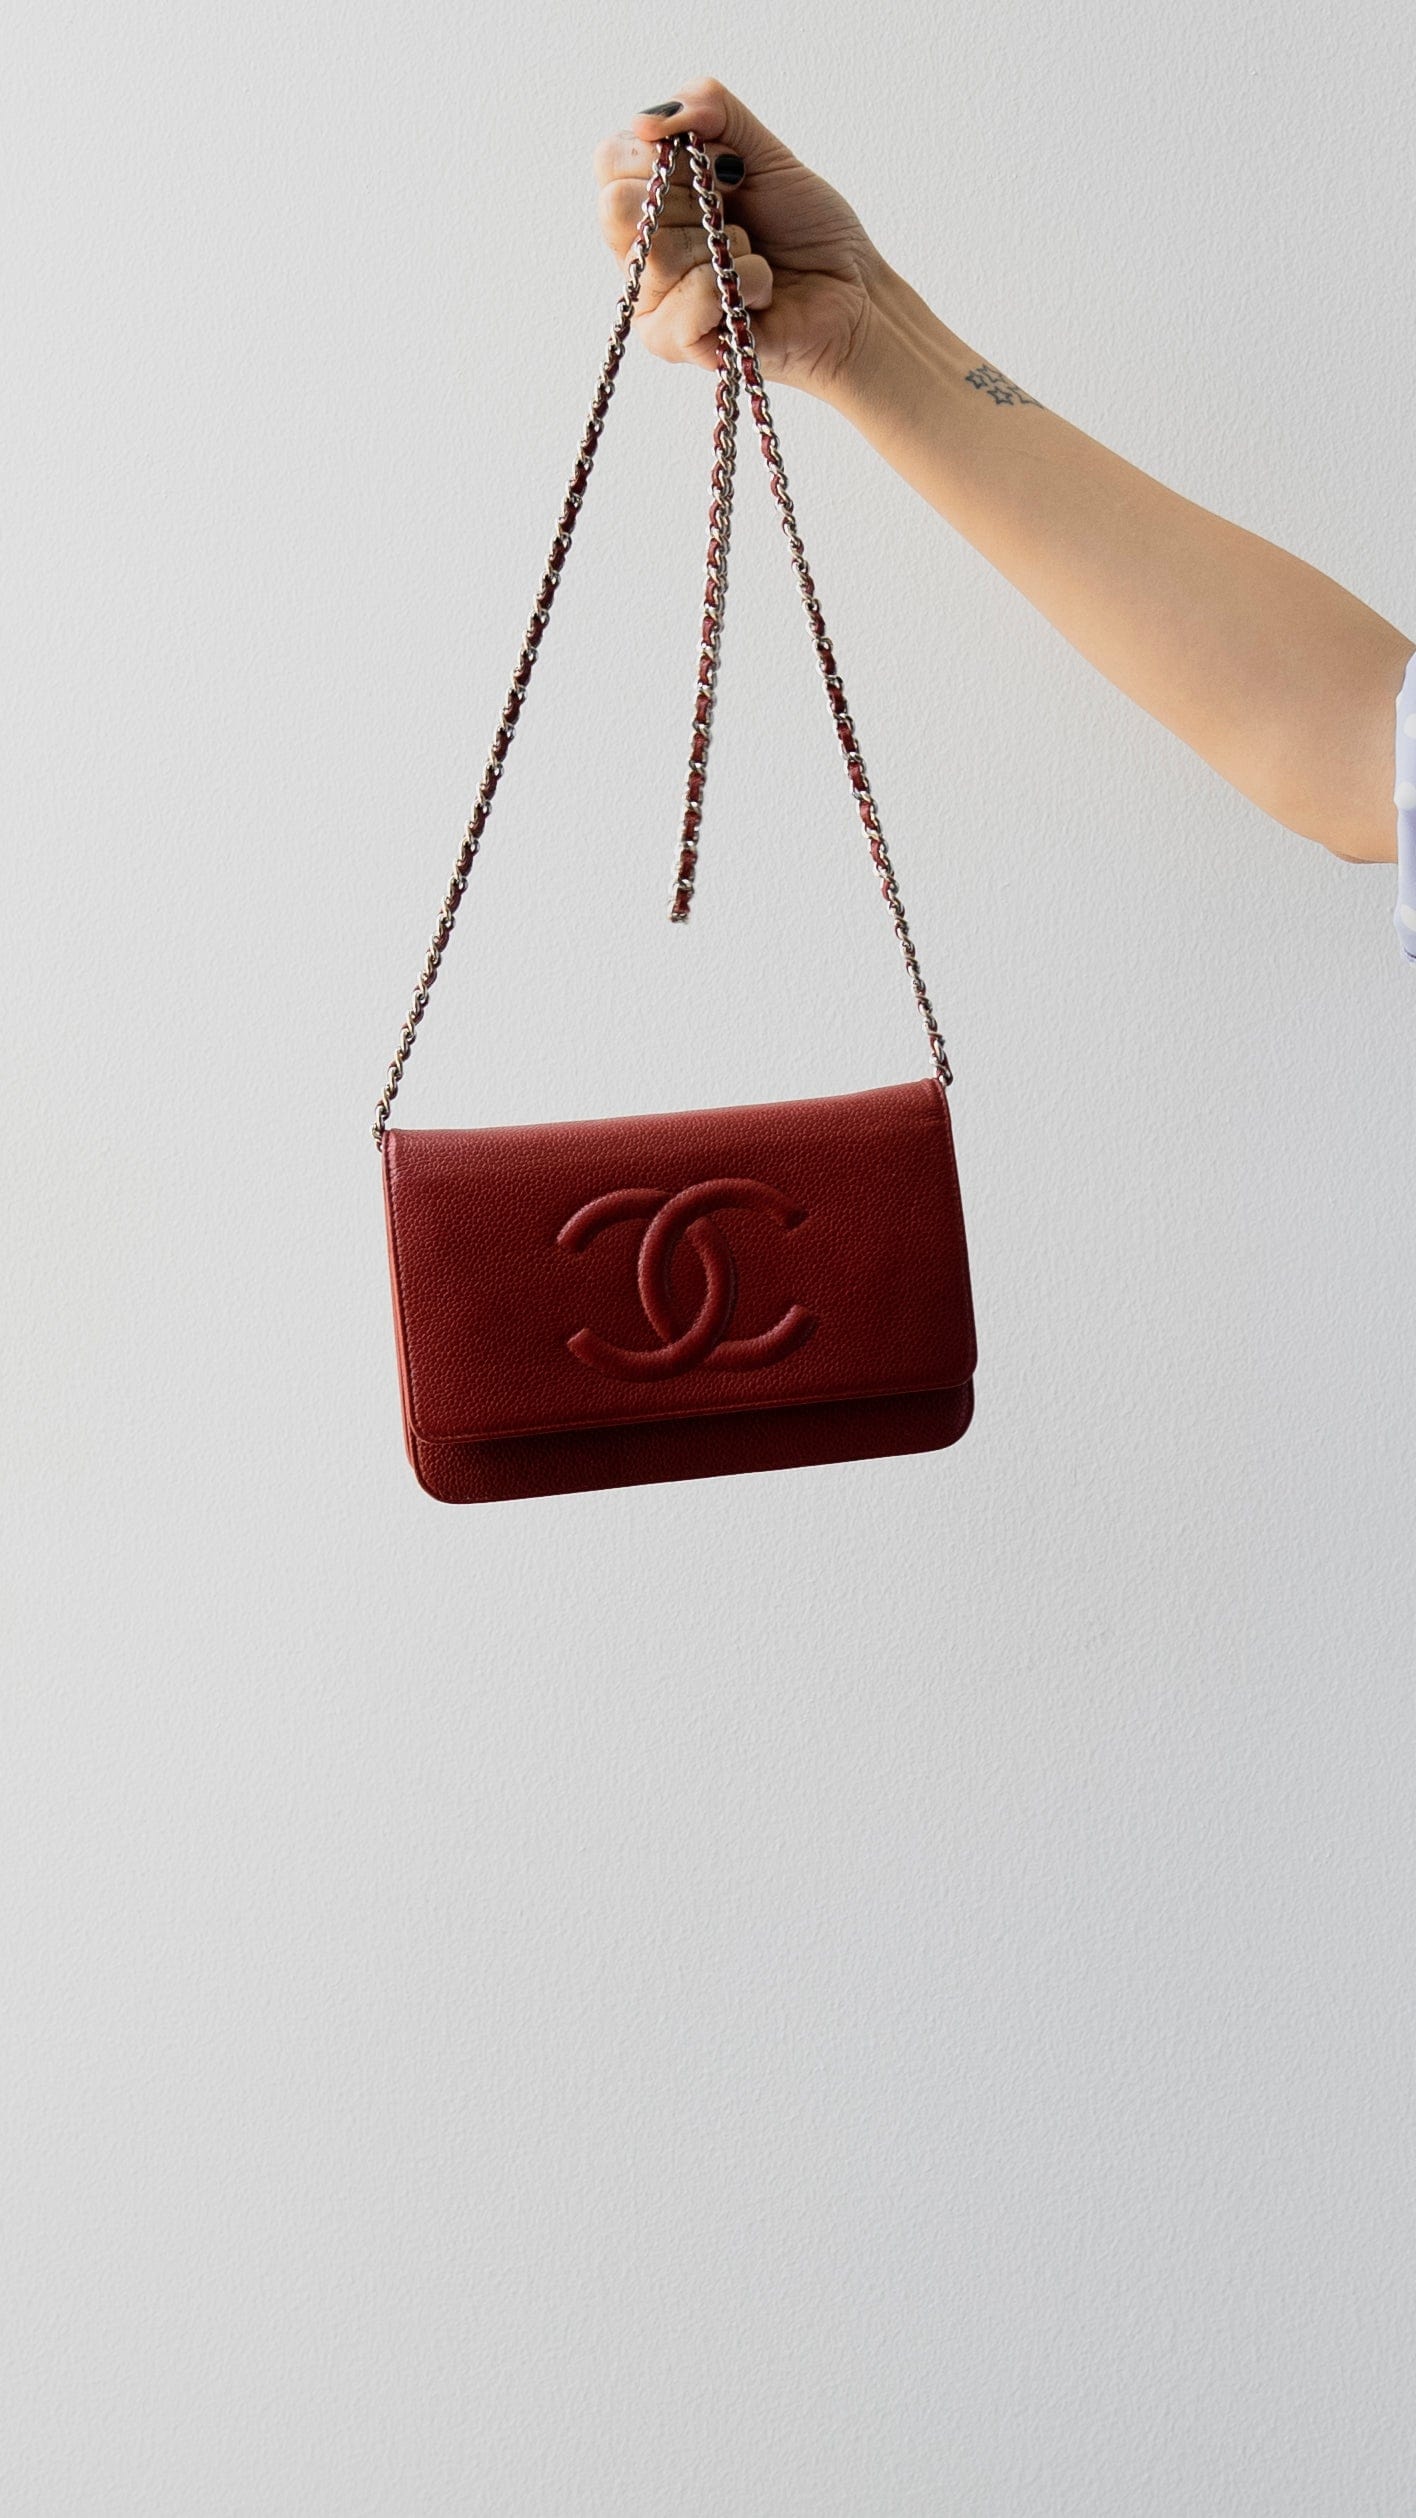 Chanel Chanel Red Wallet on Chain RJL1763